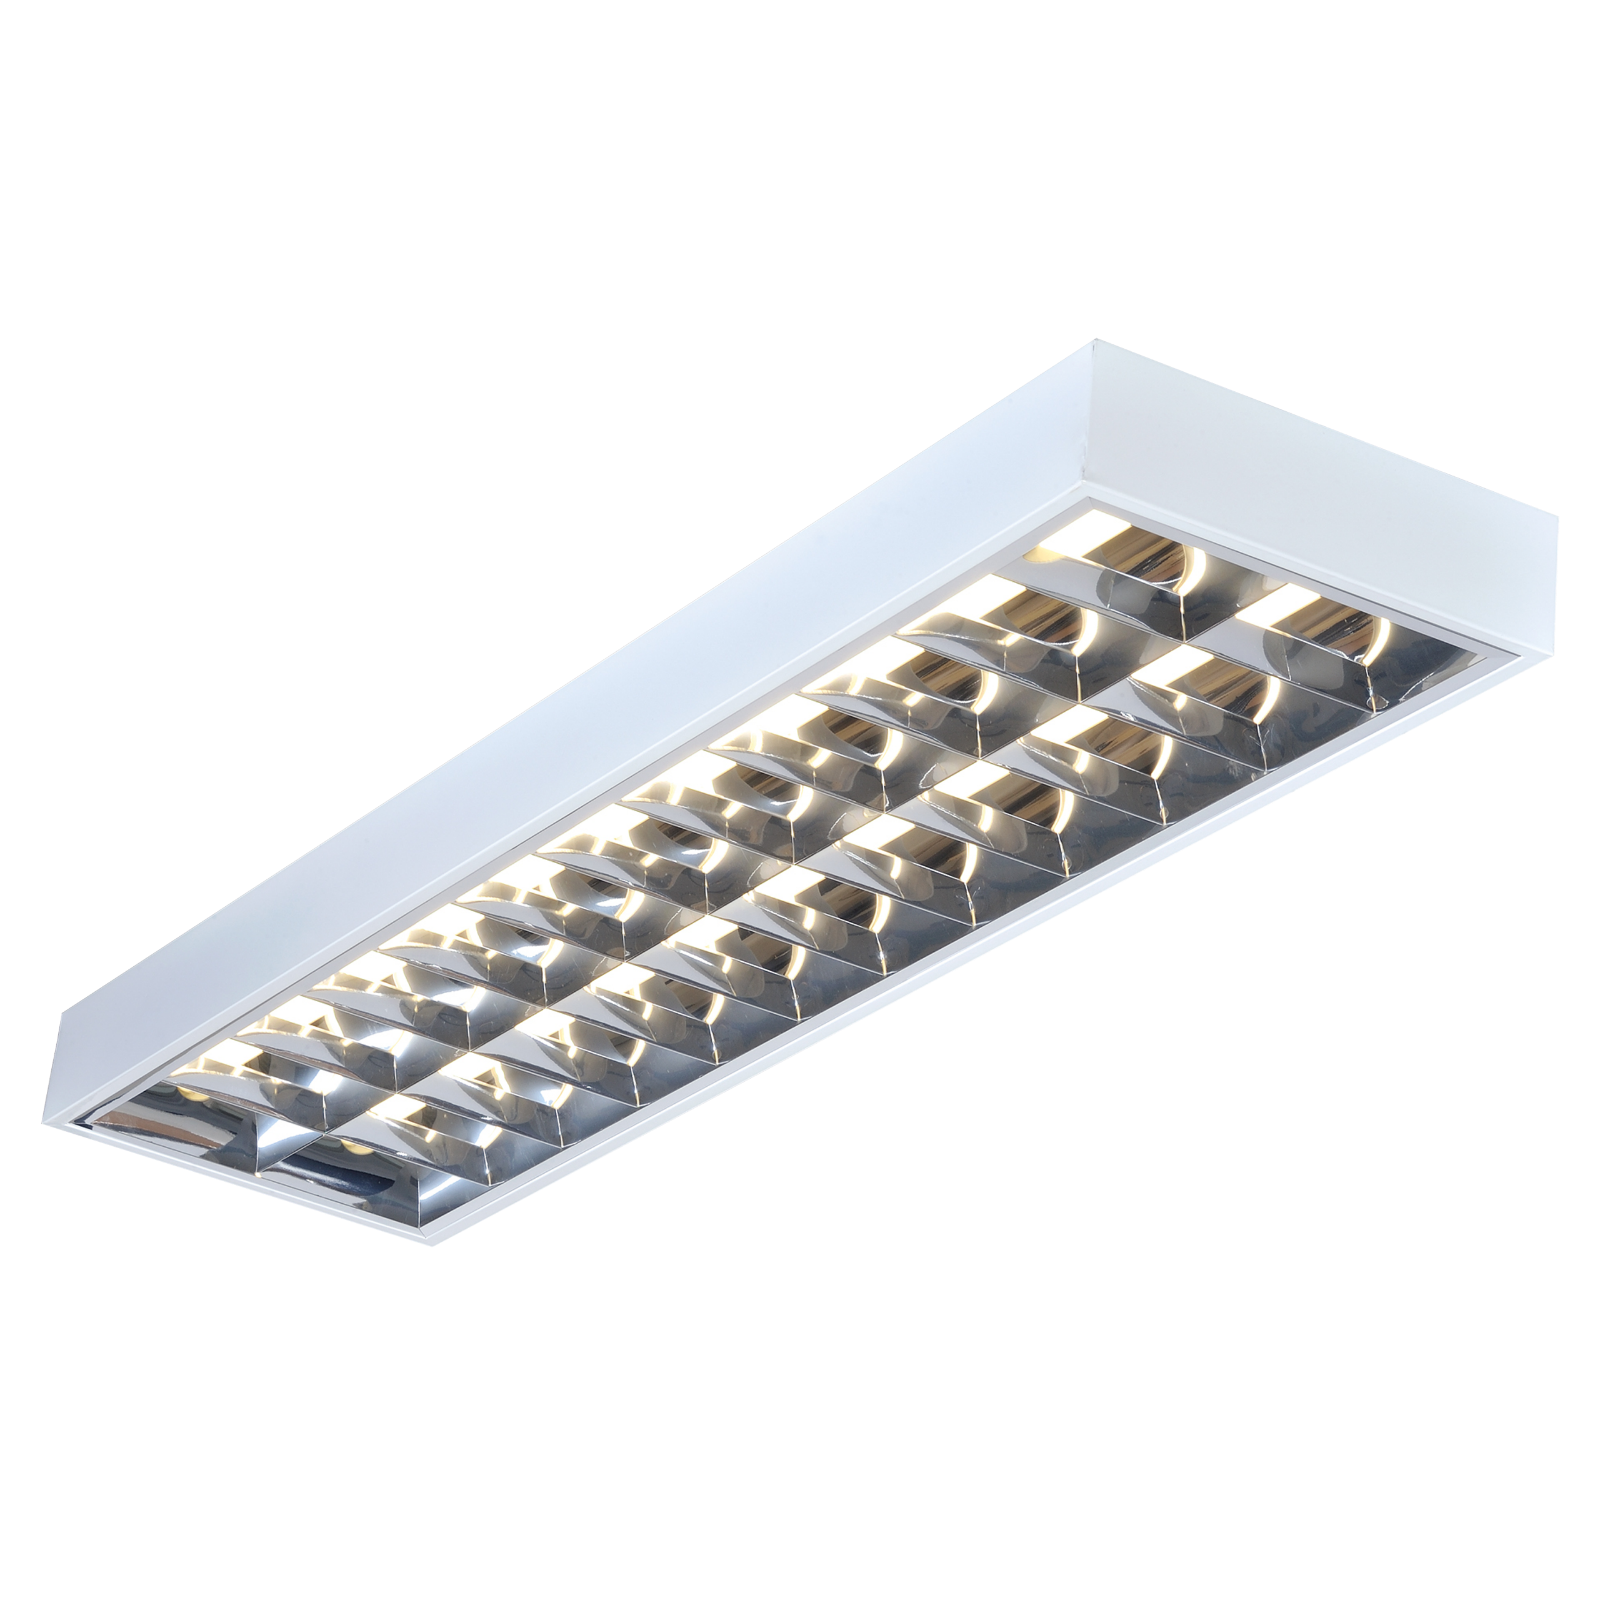 IP20 2x70W 6ft T8 Surface Mounted Fluorescent Fitting 1785x300x80mm - SURF270HF 